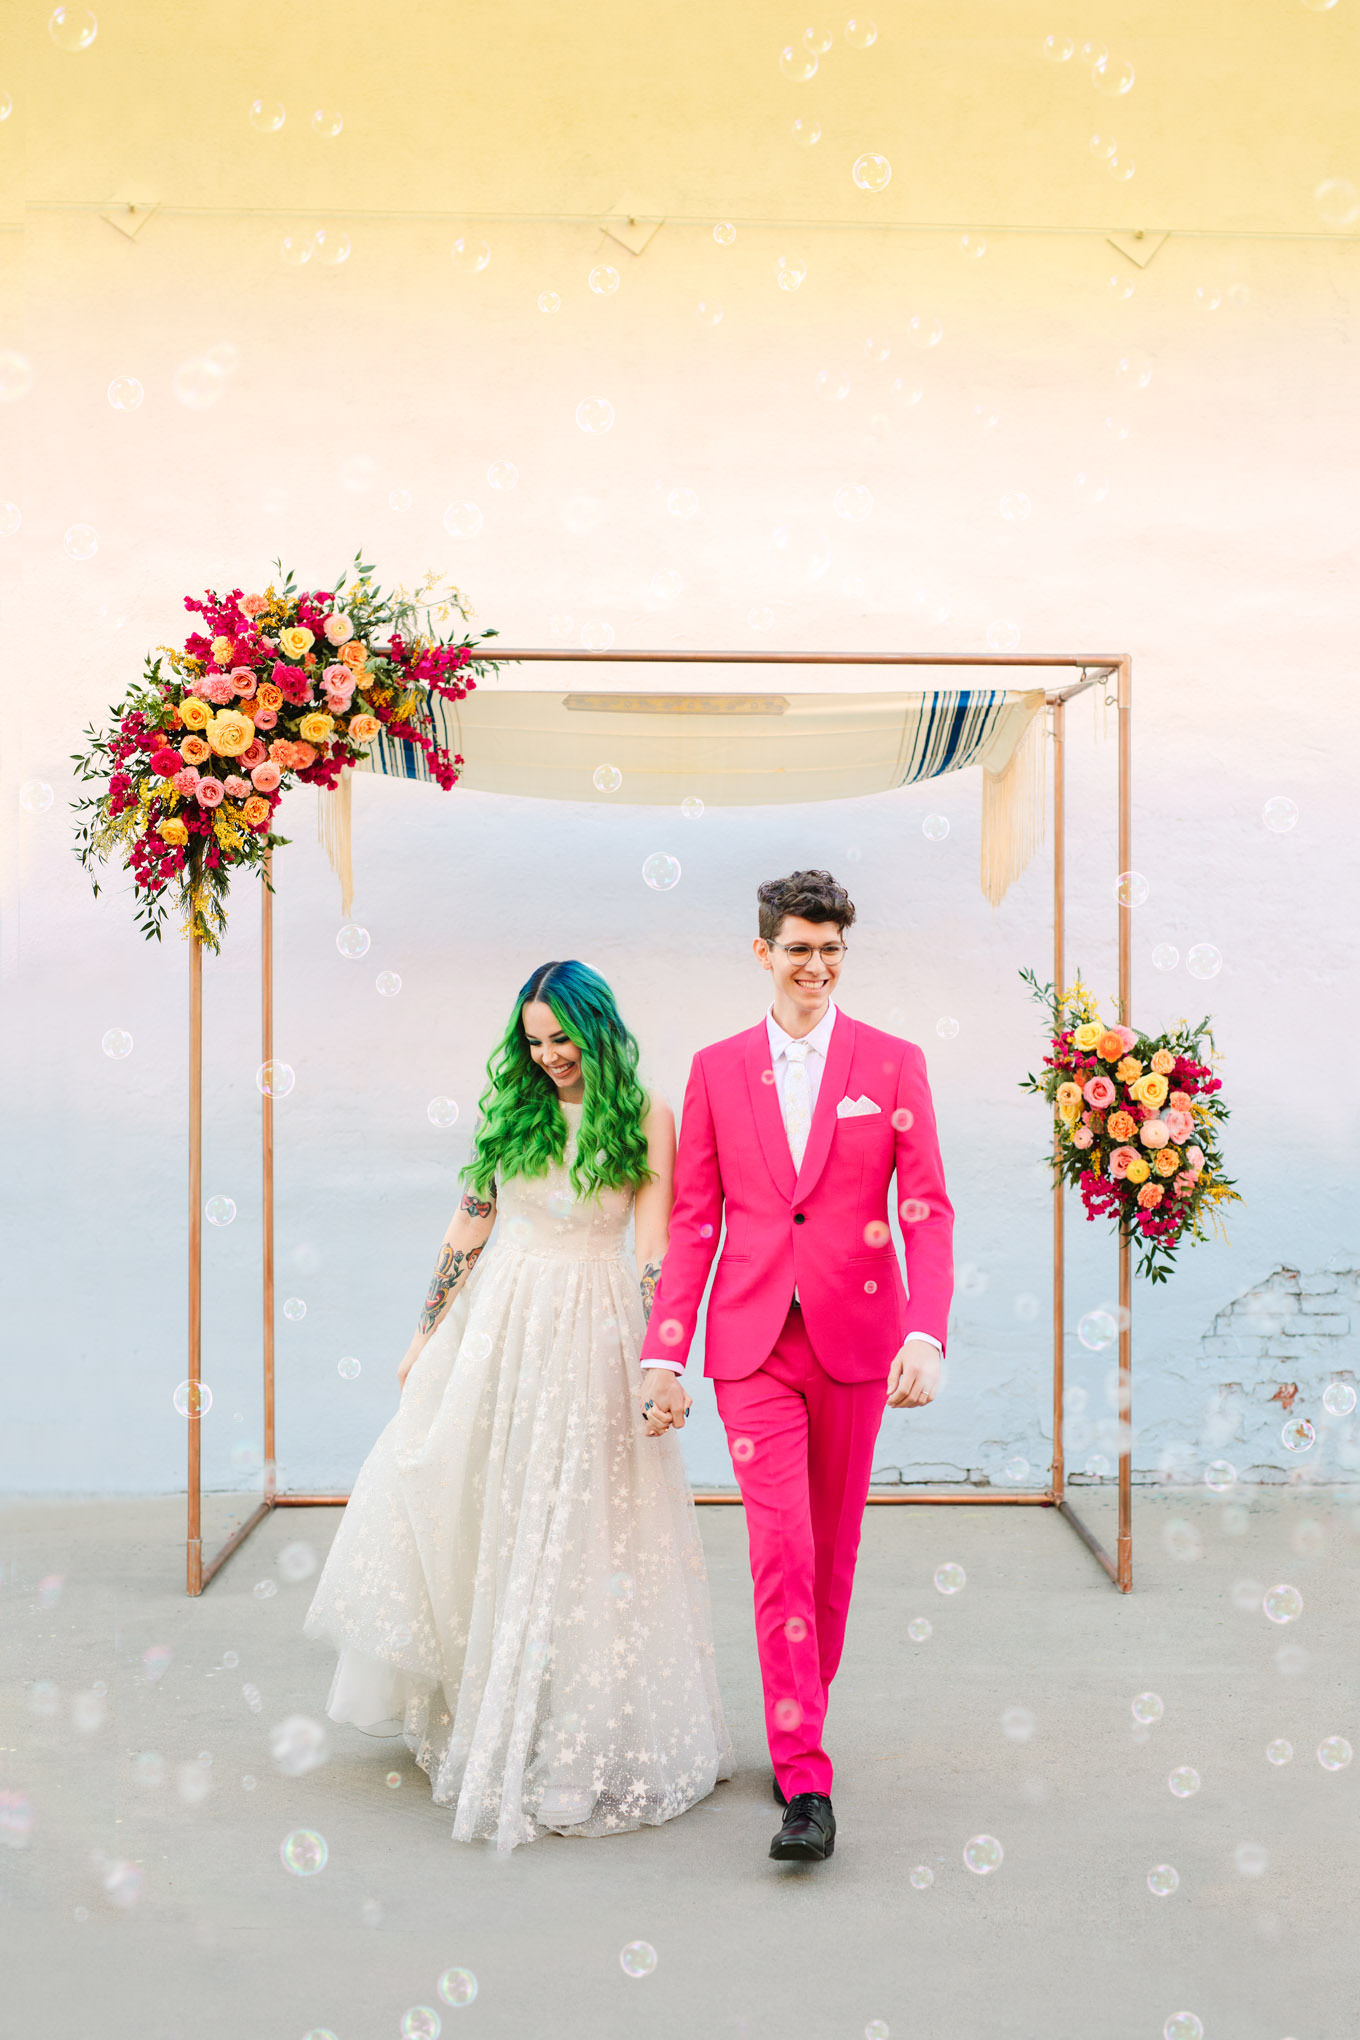 Colorful bride and groom with bubble procession at Unique Space Wedding | Engagement, elopement, and wedding photography roundup of Mary Costa’s favorite images from 2020 | Colorful and elevated photography for fun-loving couples in Southern California | #2020wedding #elopement #weddingphoto #weddingphotography   Source: Mary Costa Photography | Los Angeles